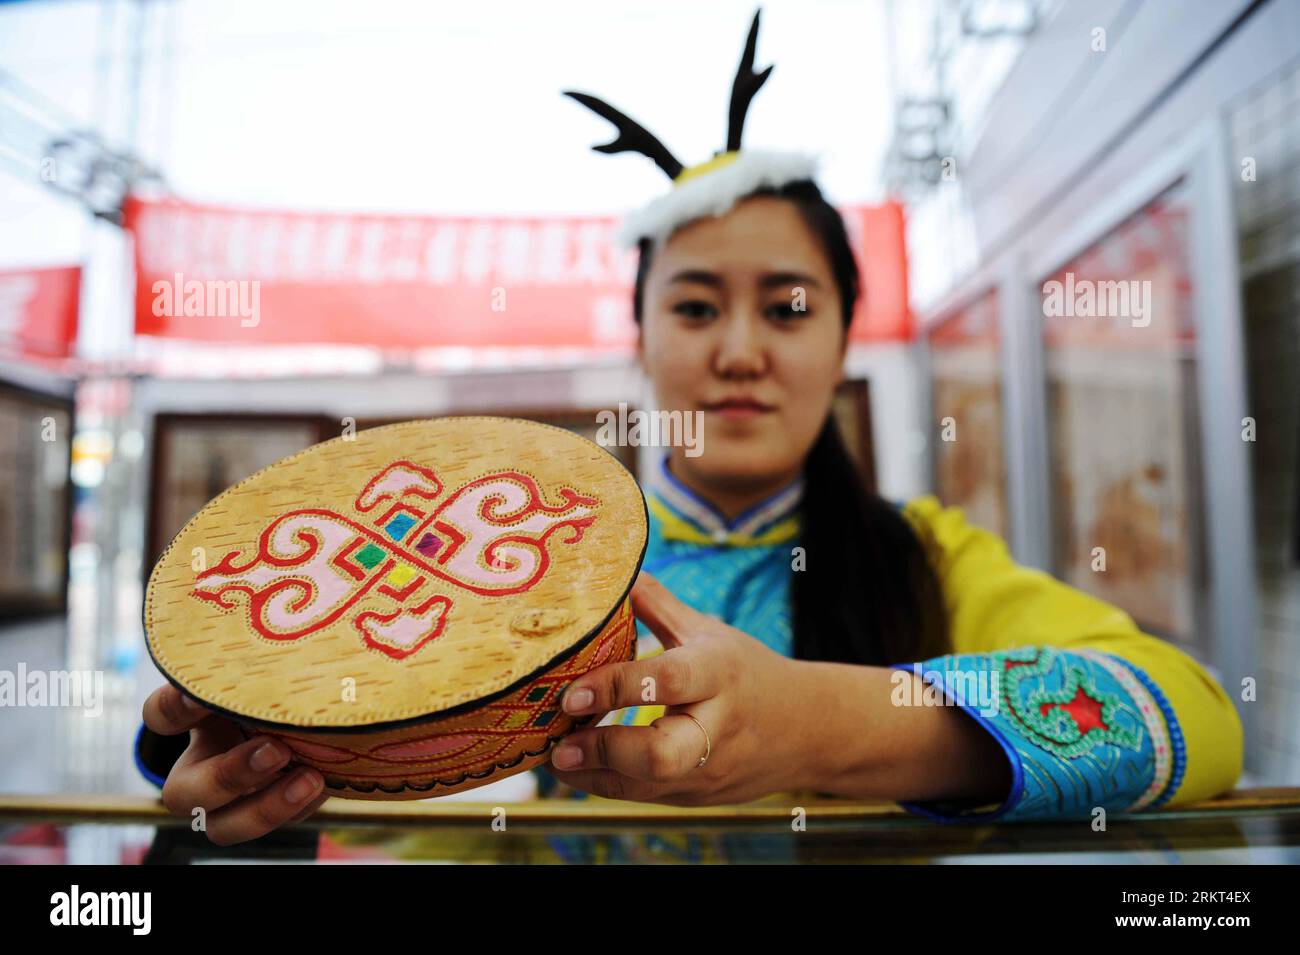 Bildnummer: 58367224  Datum: 19.08.2012  Copyright: imago/Xinhua (120821) -- HEIHE, Aug. 21, 2012 (Xinhua) -- A girln of China s Oroqen ethnic group shows a handicraft made of birch bark during the third China-Russia Cultural Festival in Heihe, northeast China s Heilongjiang Province, Aug. 19, 2012. The week-long cultural event, launched on Sunday, is jointly hosted by Heihe and the neighbouring Russian city of Blagoveshchensk. The festival presents a variety of art performances and artpieces to showcase the cultures of both countries. (Xinhua/Wang Jianwei) (lmm) CHINA-HEILONGJIANG-HEIHE-RUSSI Stock Photo